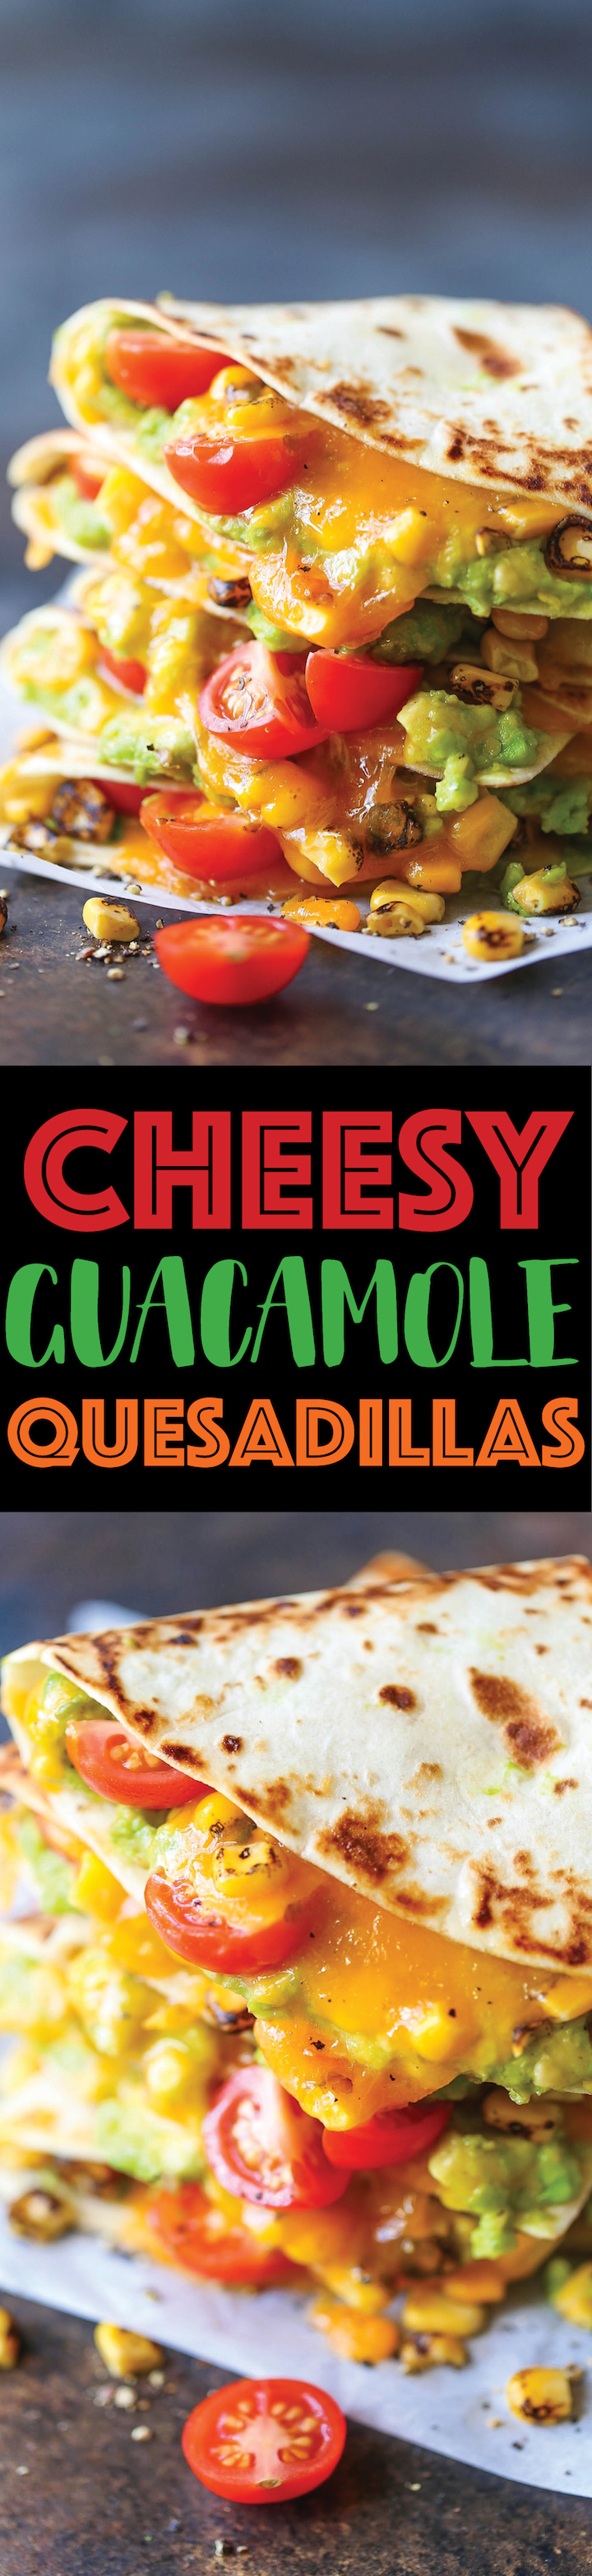 Guacamole Quesadillas - A quick go-to meal with only 5 ingredients! This can be served as an appetizer, side, light lunch or even a main! Sure to be a hit!